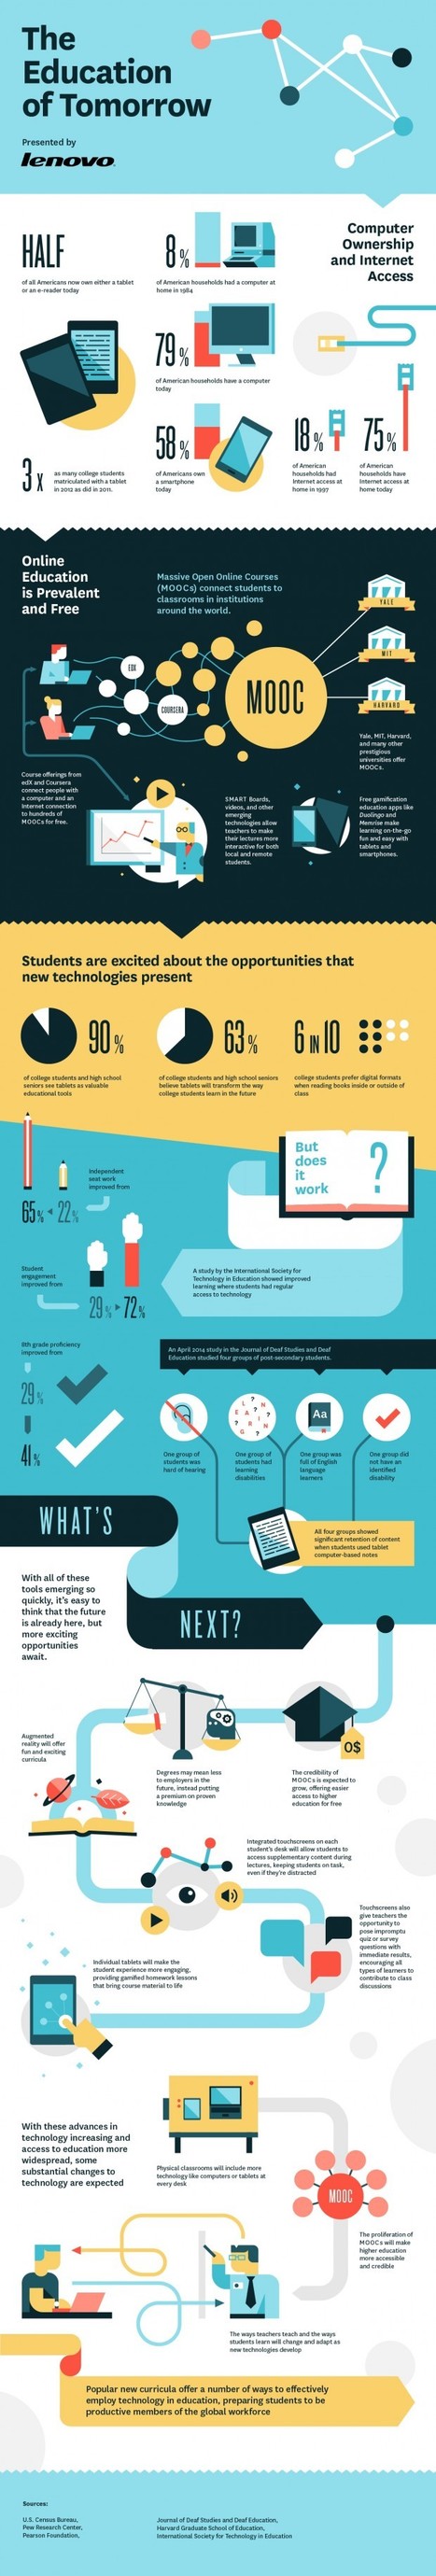 Is This The Future Of Education? [Infographic] | Didactics and Technology in Education | Scoop.it